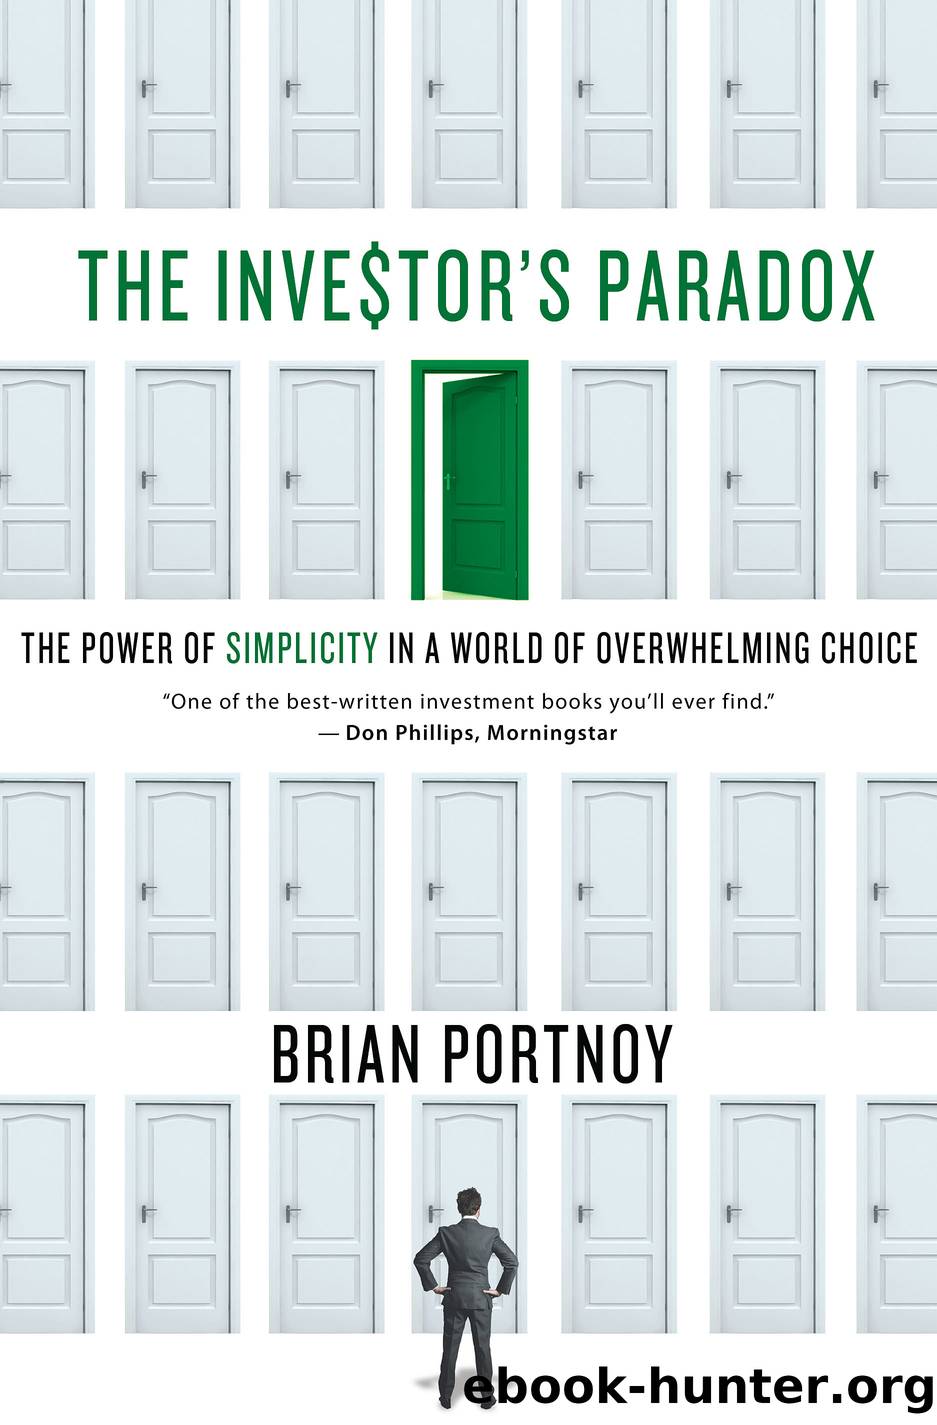 The Investor's Paradox by Brian Portnoy